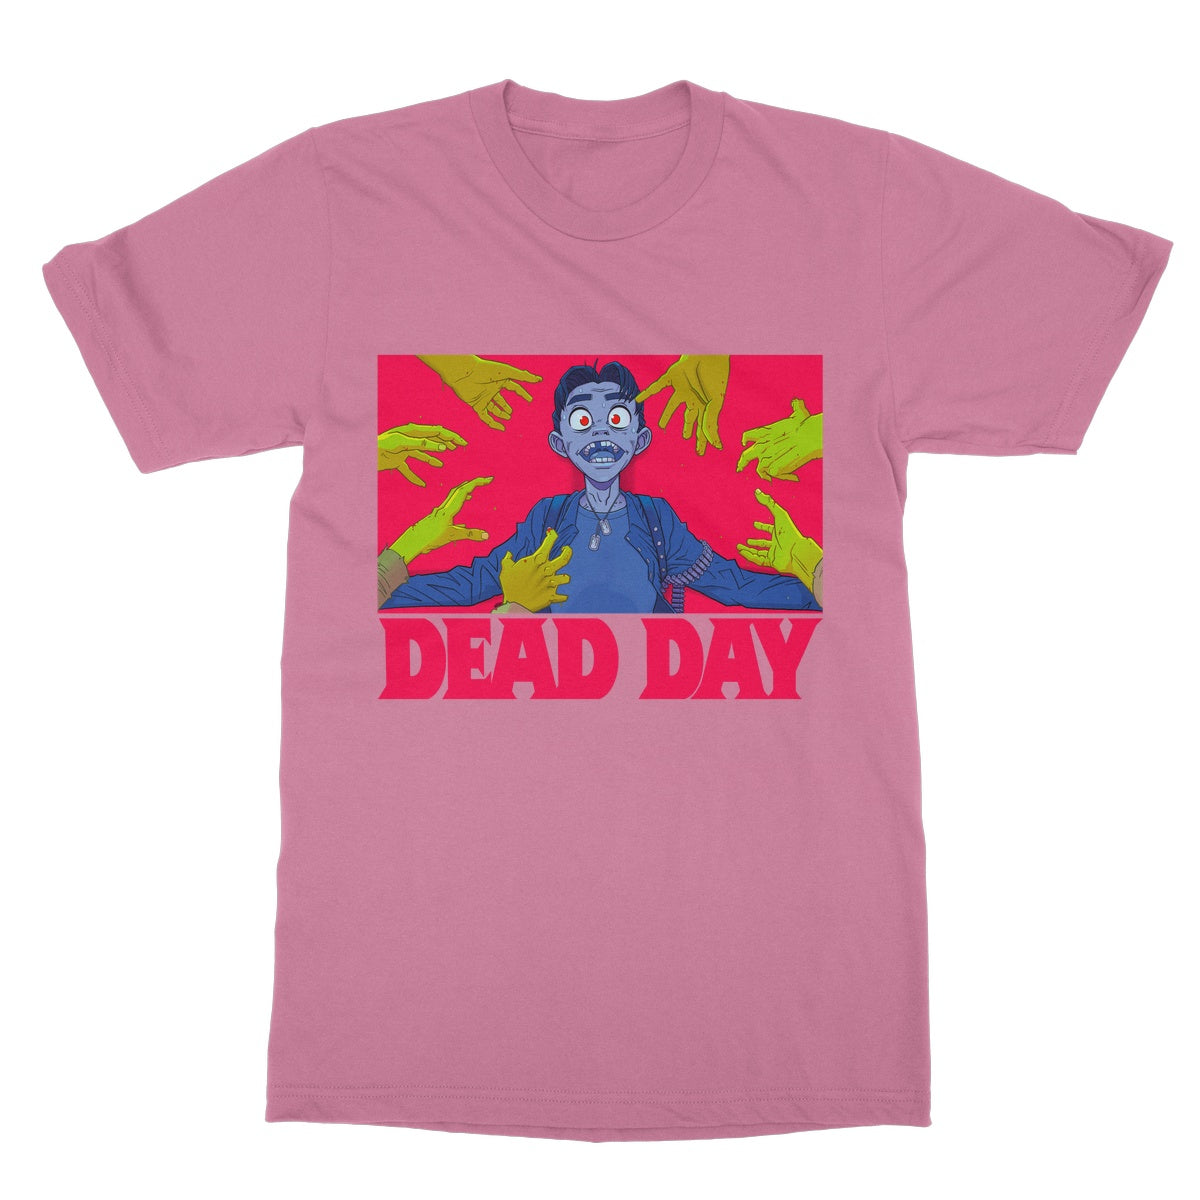 Dead Day Zombie T-Shirt Pink